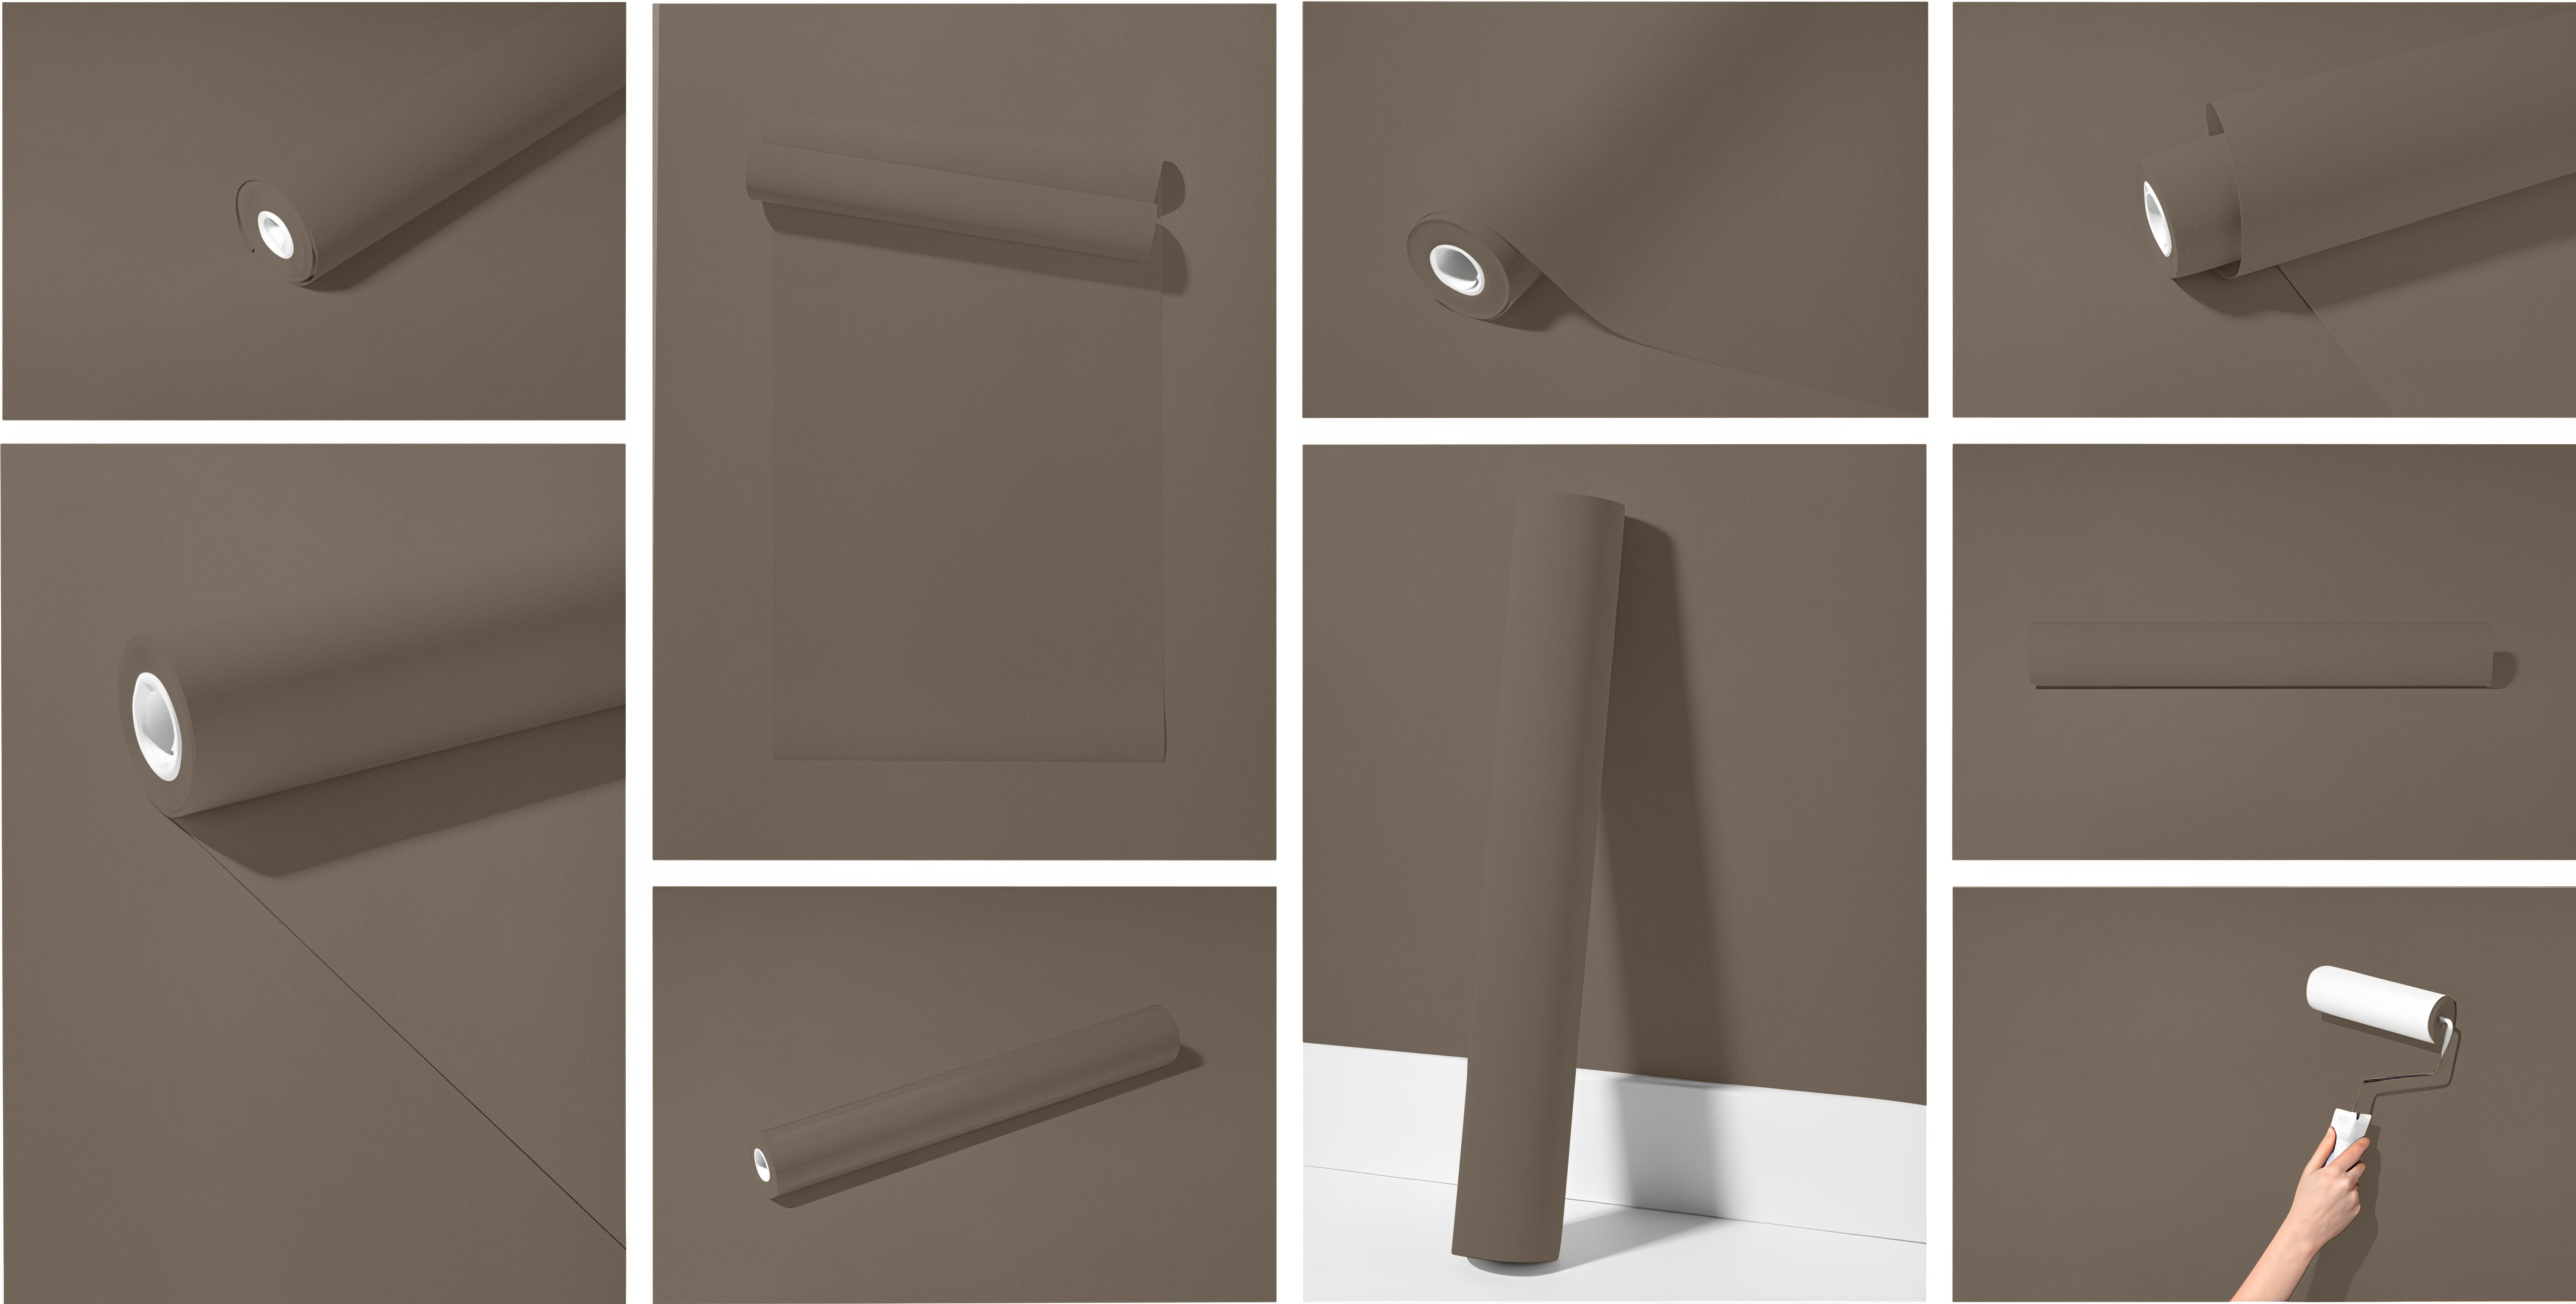 Peel & Stick Removable Re-usable Paint - Color RAL 7006 Beige Grey - offRAL™ - RALRAW LLC, USA